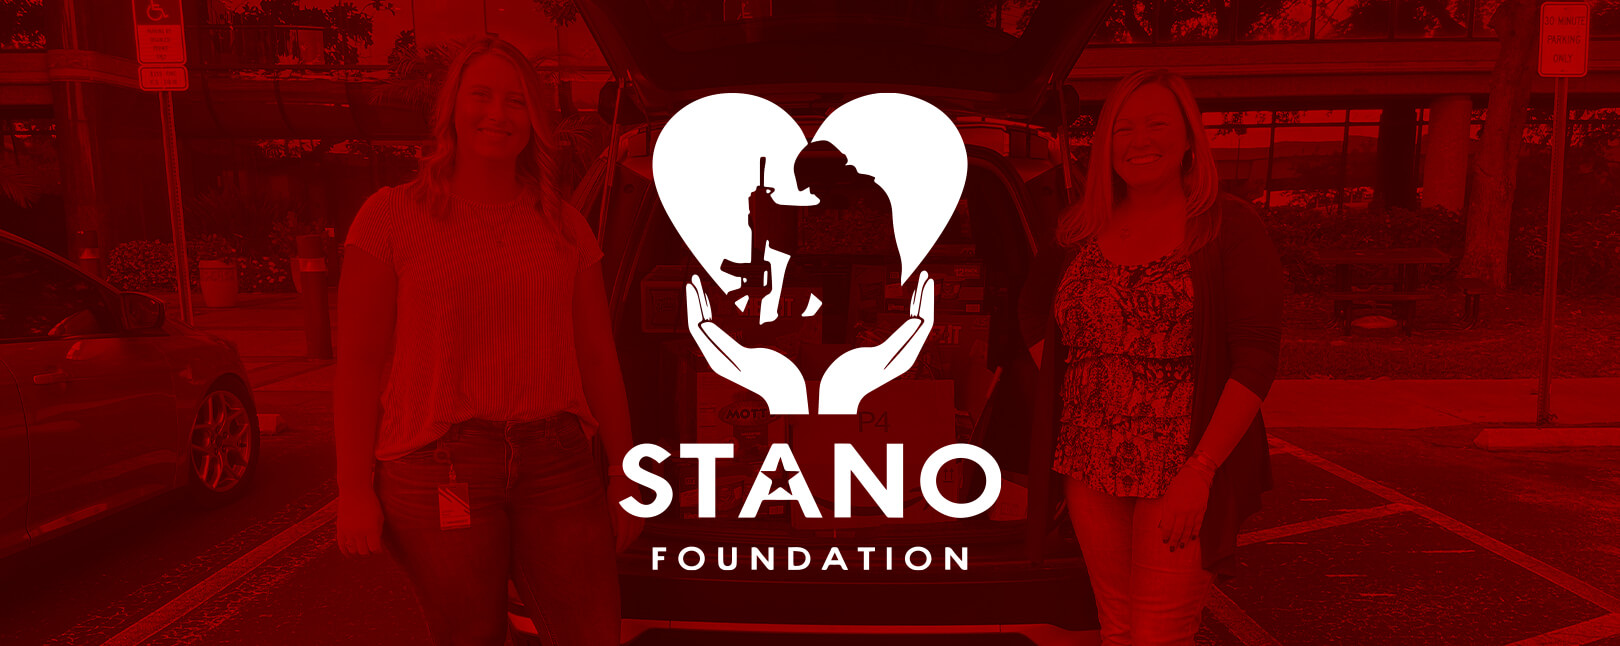 Chargebacks911® Lends a Hand With the Stano Foundation